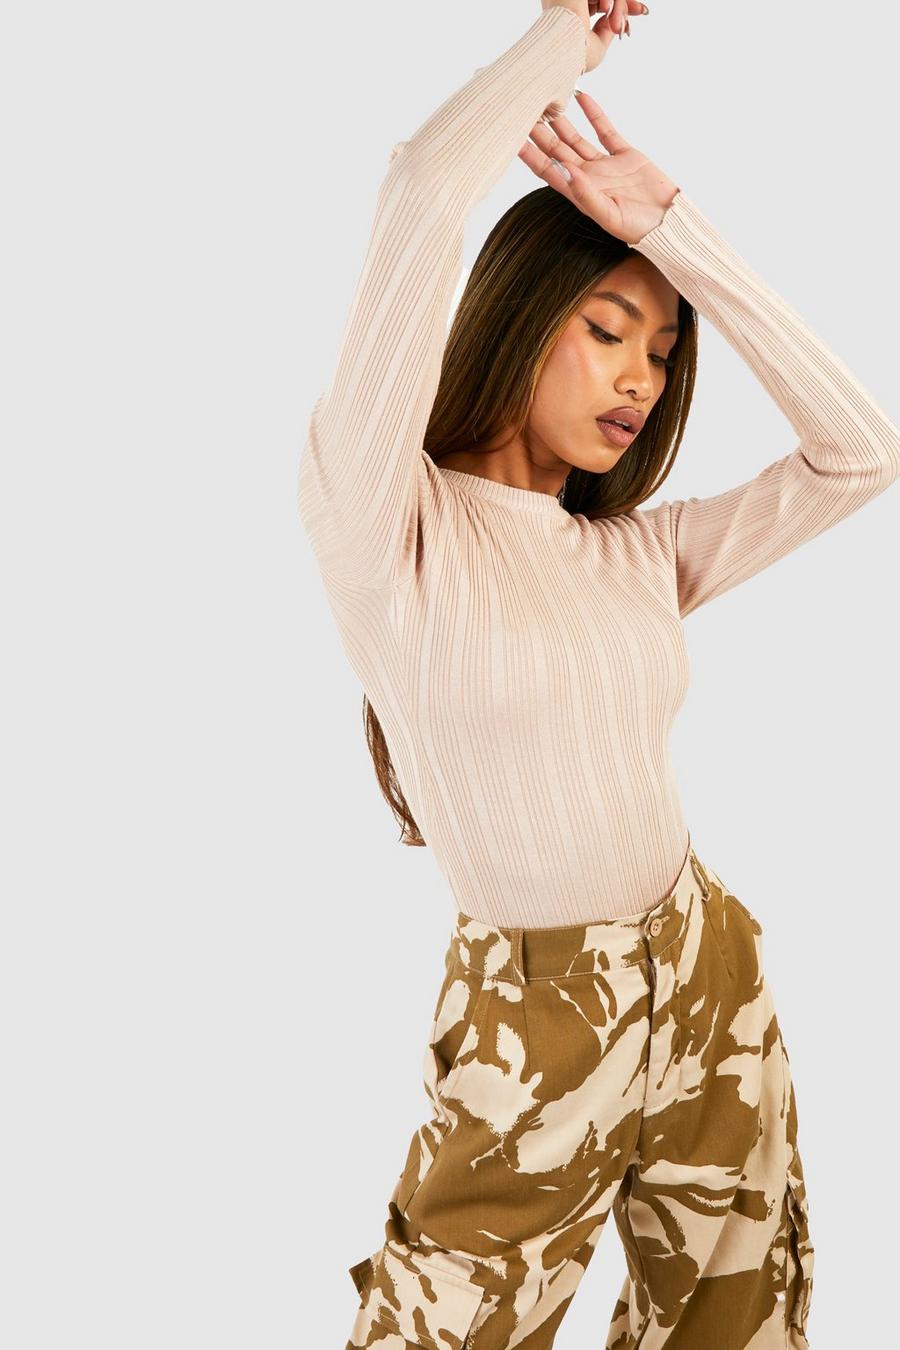 Mixed Feelings Crop Top and Skirt Set